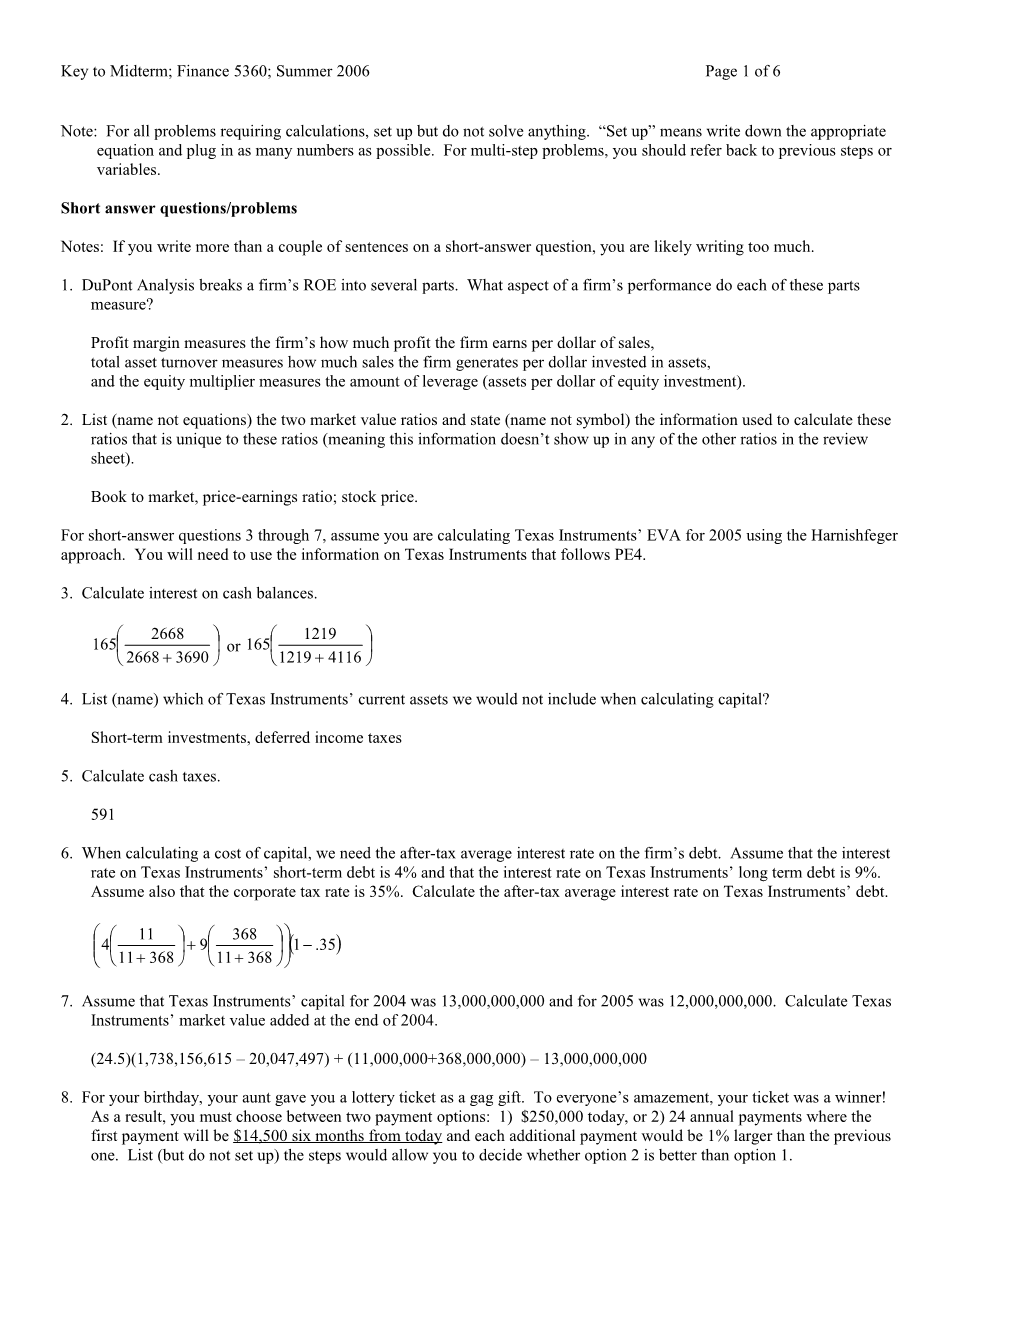 Key to Midterm; Finance 5360; Summer 2006 Page 5 of 6